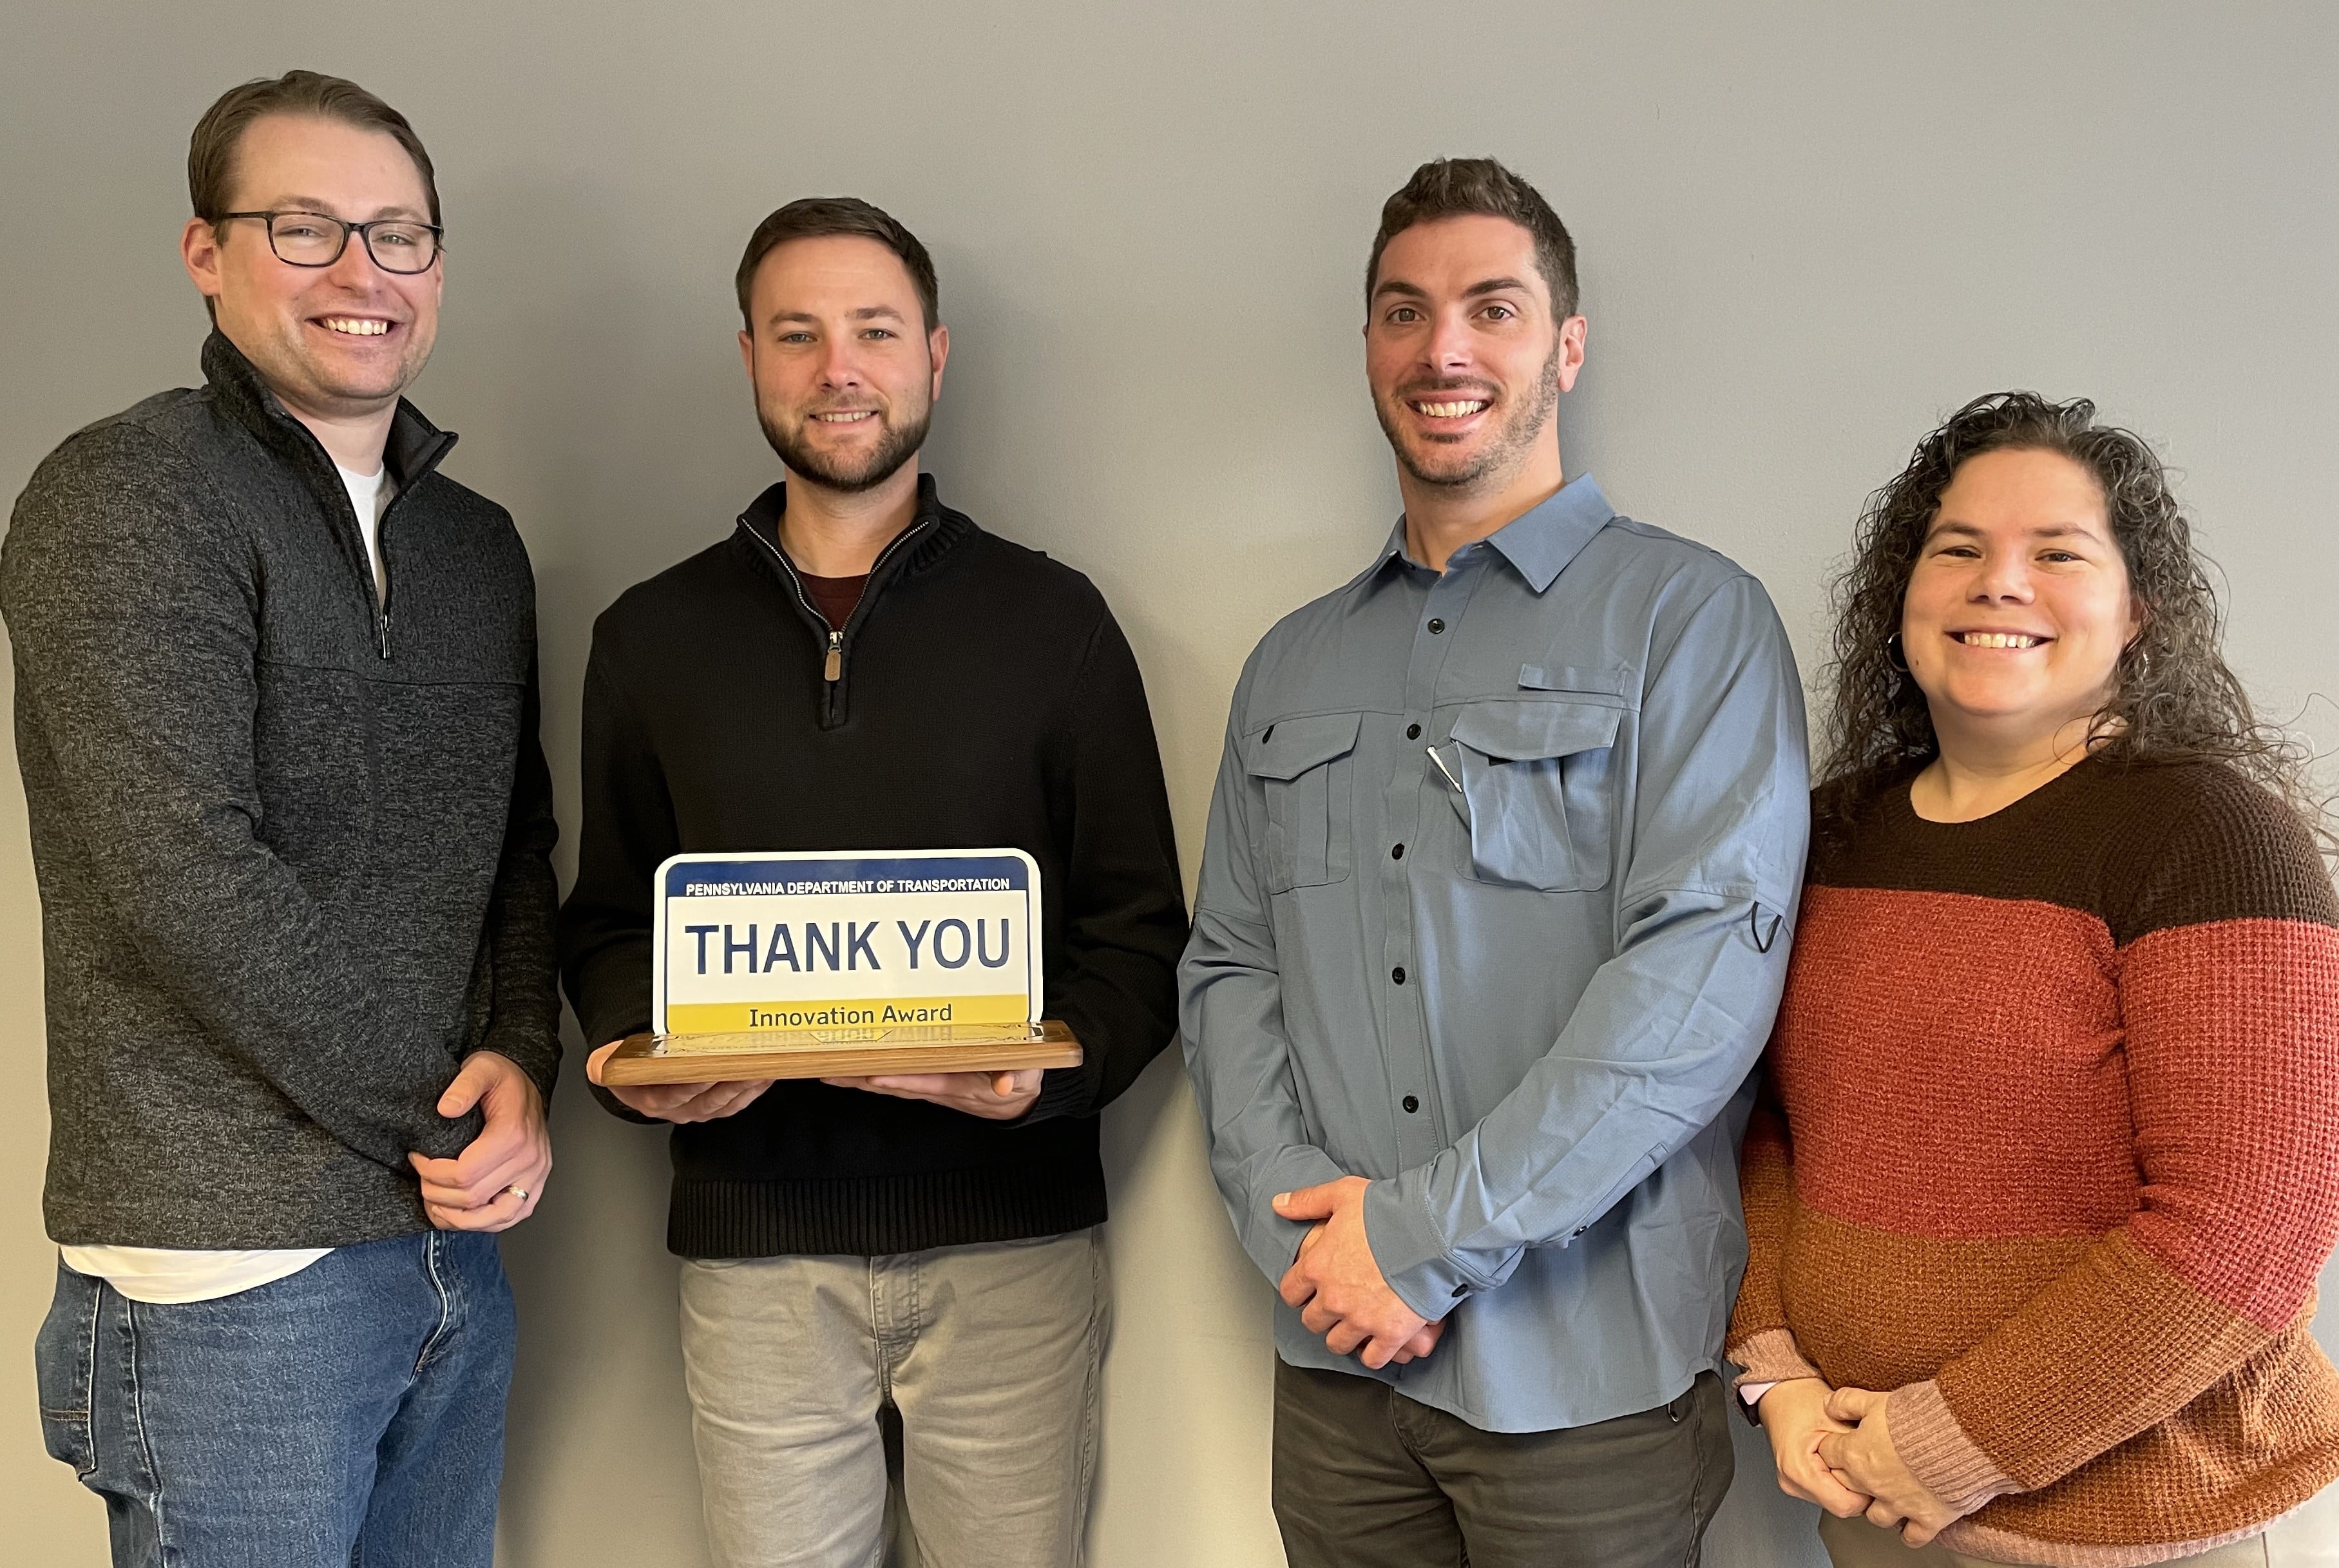 Four individuals stand in a line smiling with one of the individuals holding an award that looks like a blue, yellow, and white Pennsylvania license plate with the words 'Thank You' on it